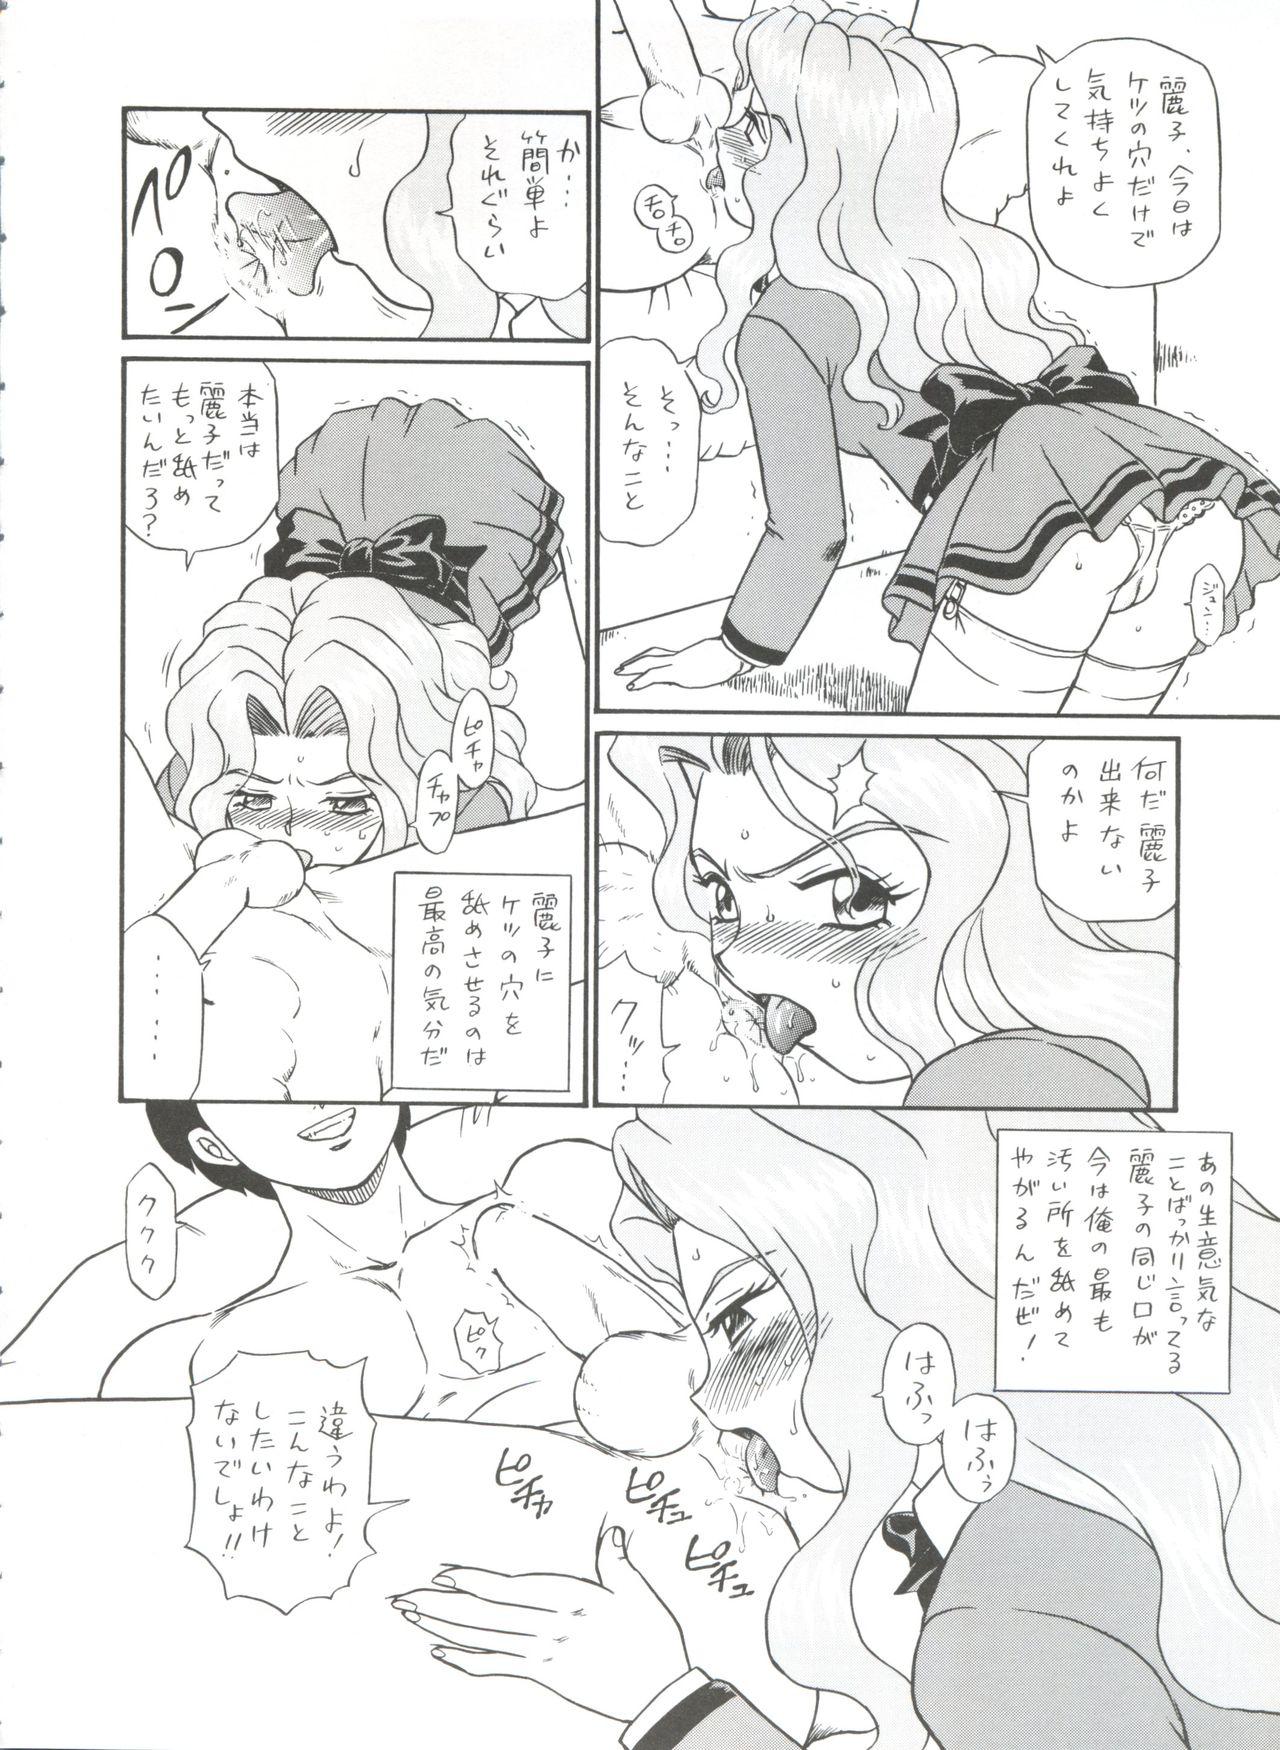 Gay Bukkakeboy Shippoppo Club House - Ghost sweeper mikami Kakyuusei Aim for the ace Jaja uma grooming up Porn Pussy - Page 6